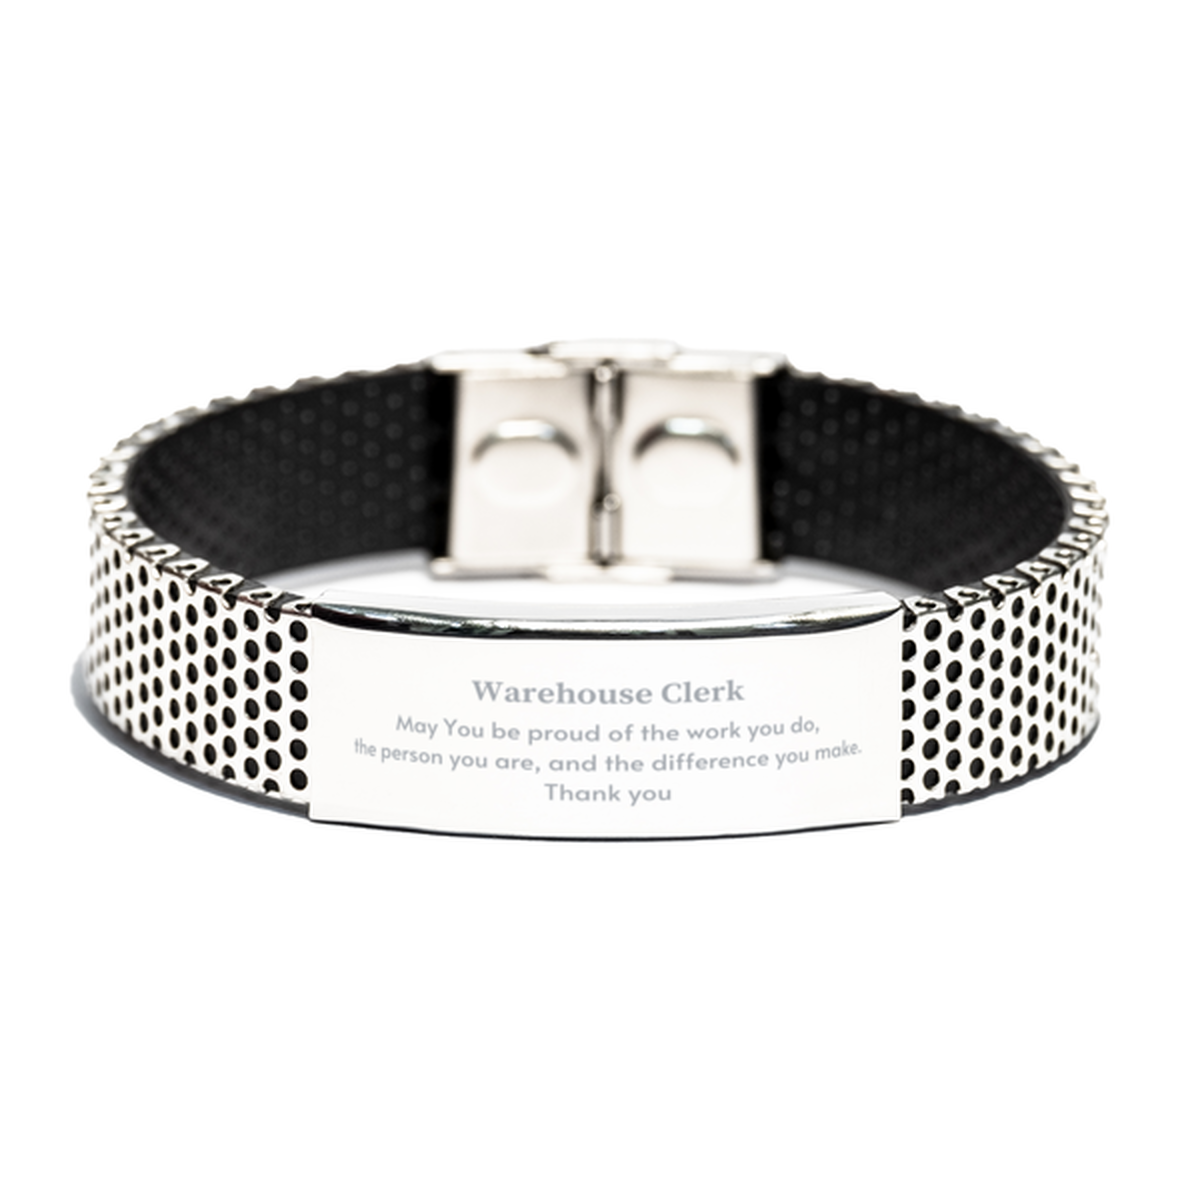 Heartwarming Stainless Steel Bracelet Retirement Coworkers Gifts for Warehouse Clerk, Warehouse Clerk May You be proud of the work you do, the person you are Gifts for Boss Men Women Friends